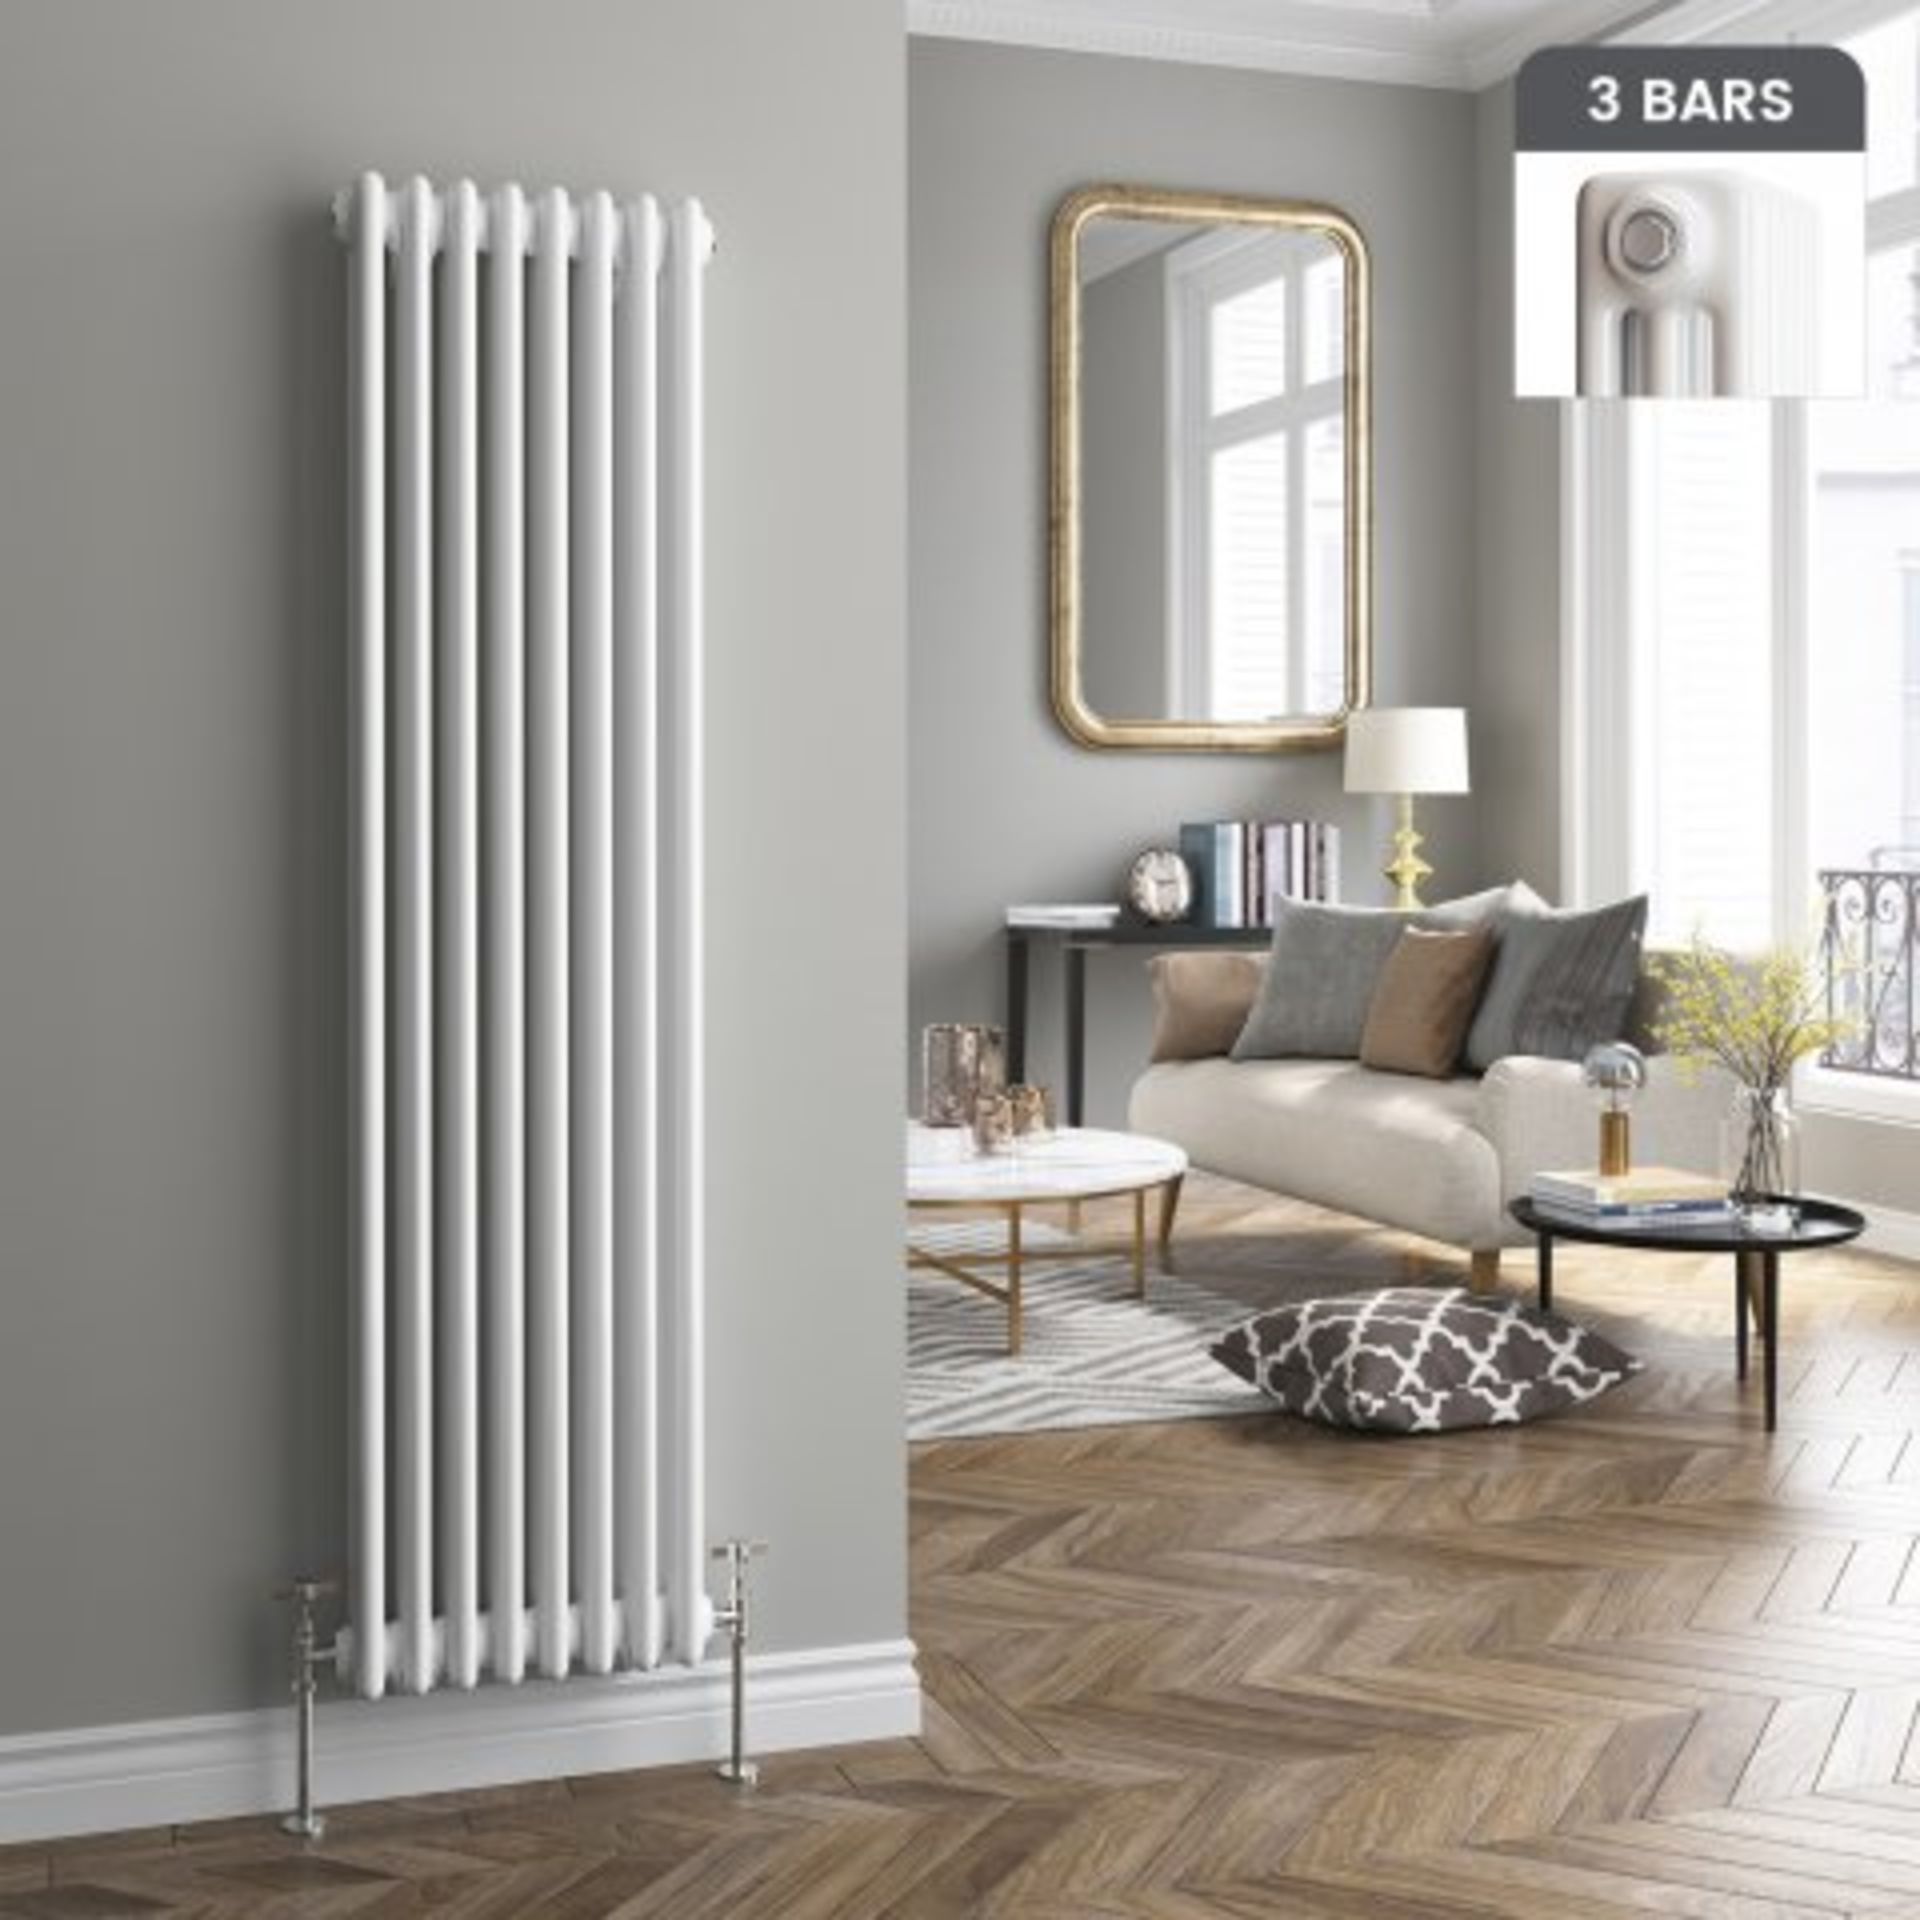 (N130) 1500x380mm White Triple Panel Vertical Colosseum Traditional Radiator. RRP £371.99. Classic